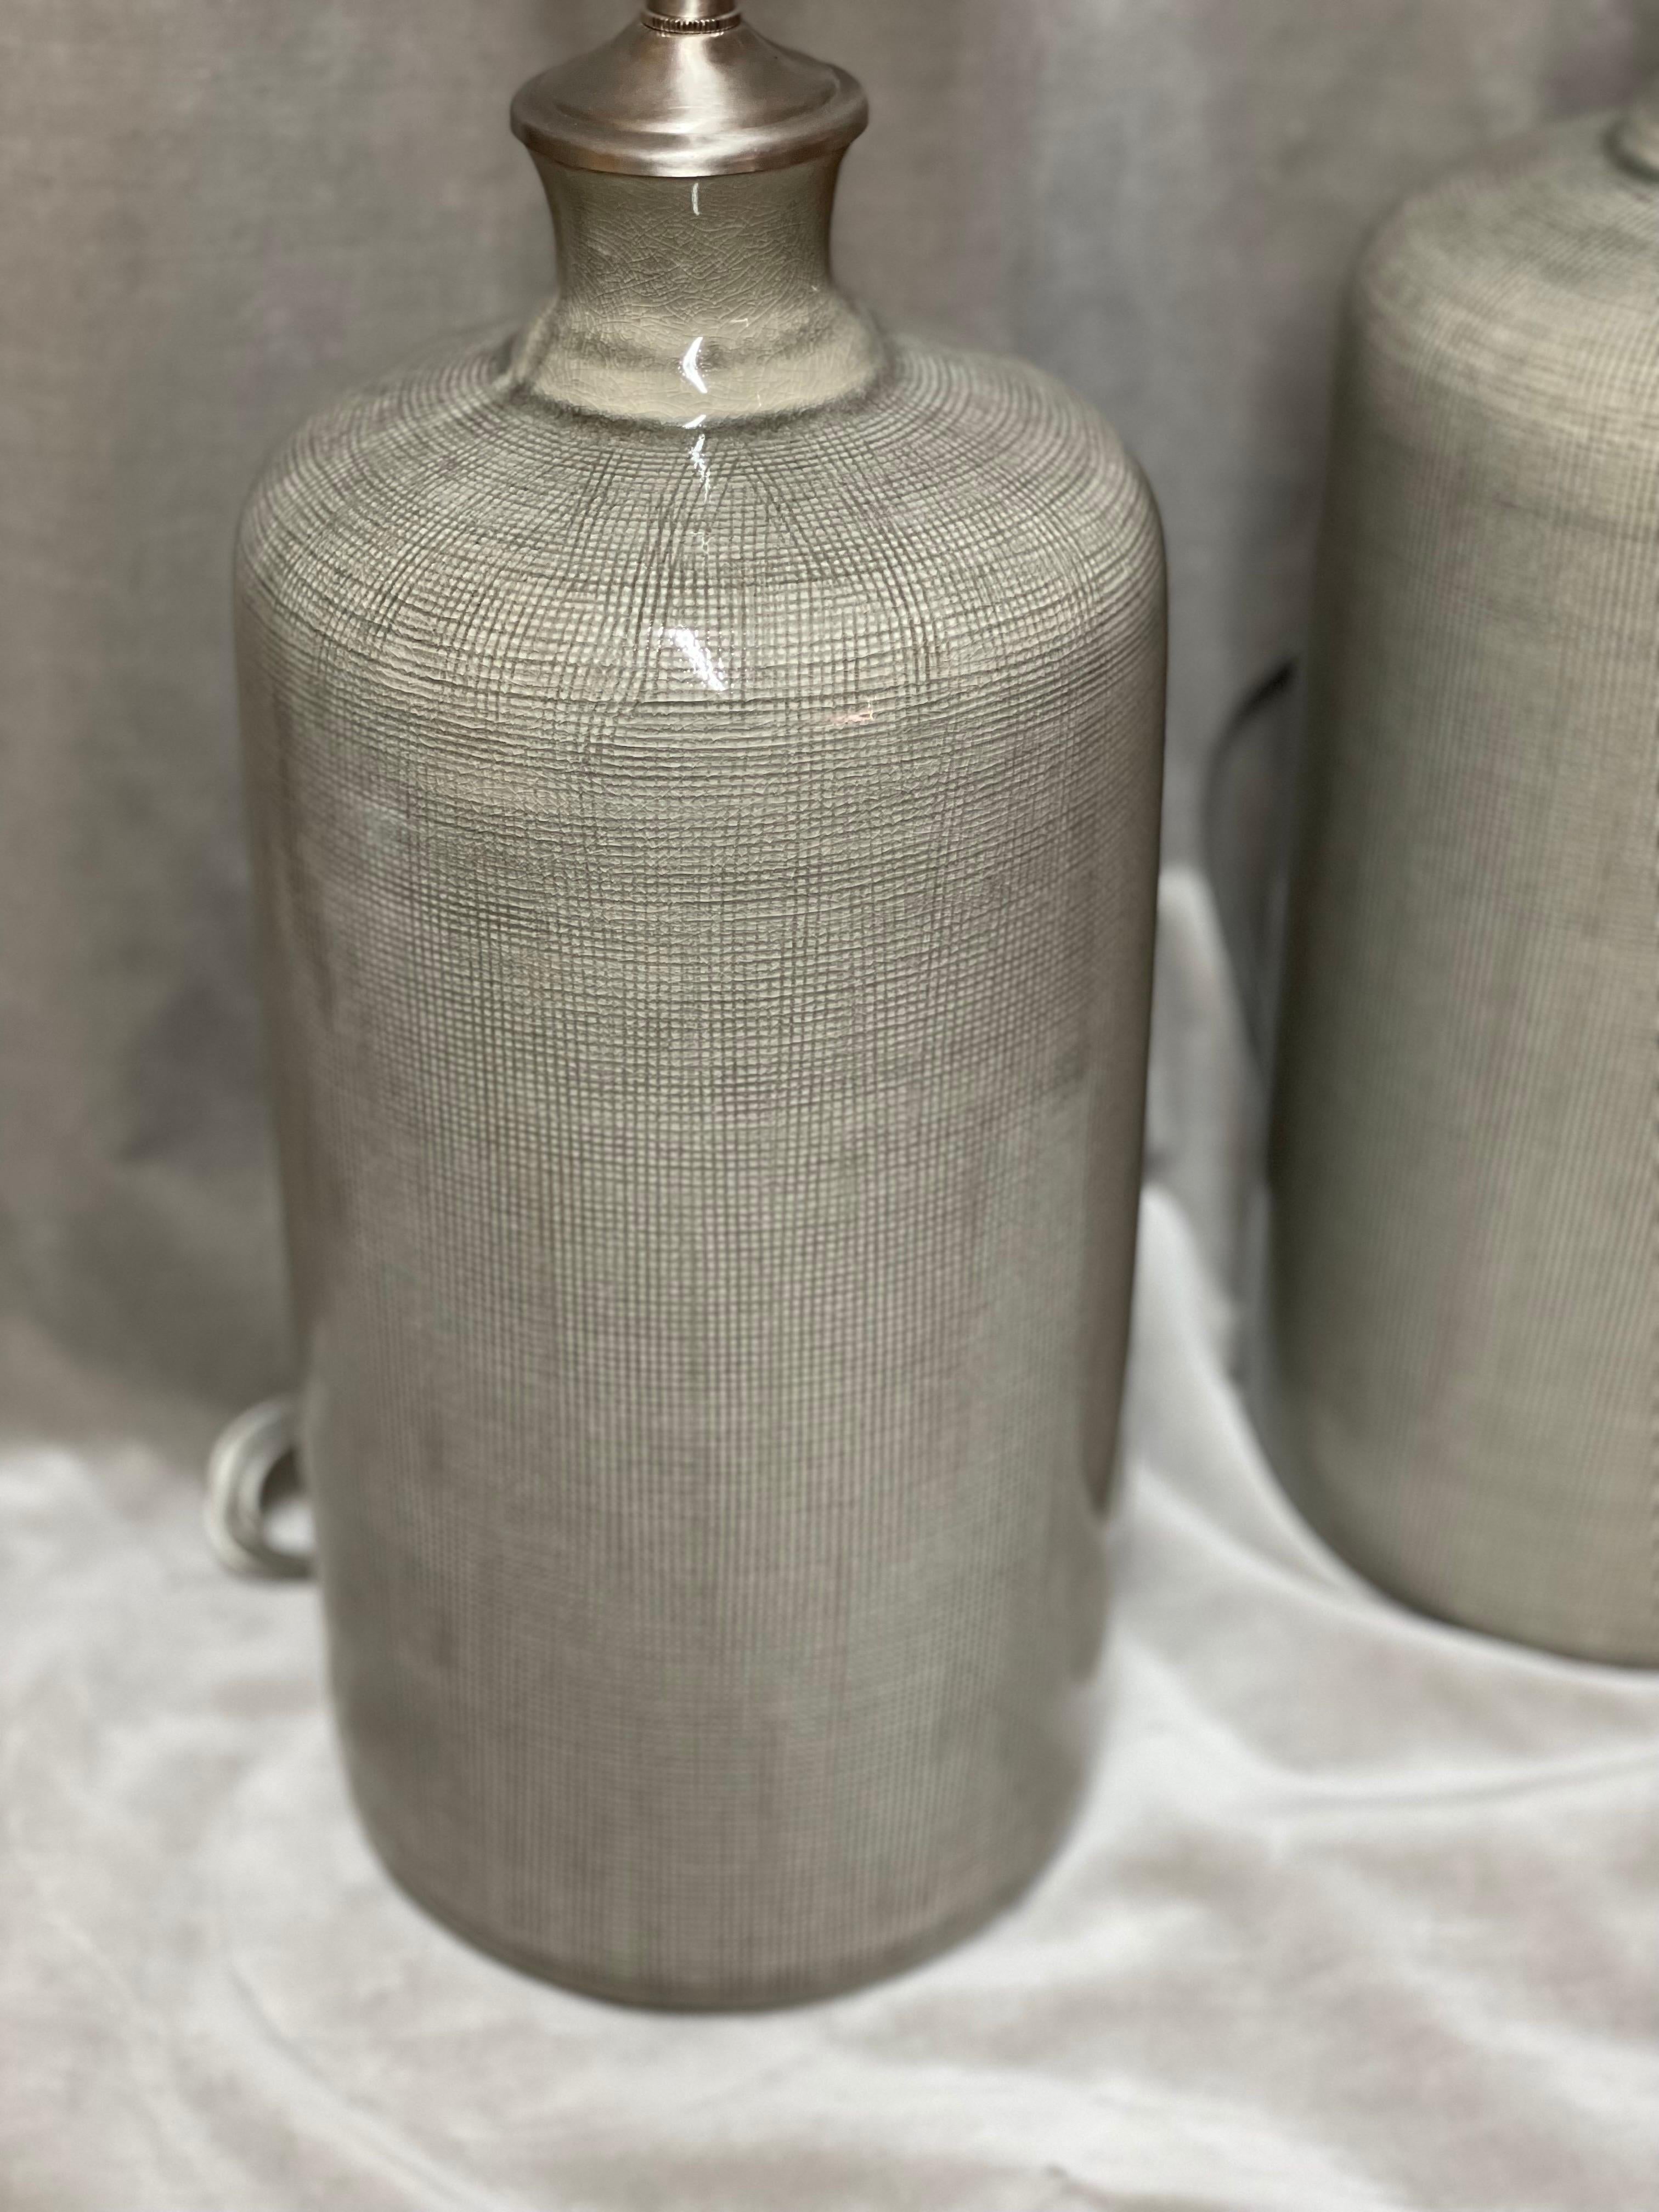 Great tall gray textured ceramic vessels with lamp application. These lamps have a beautiful glaze in Celadon style. The depth of color and texture gives these lamps an amazing richness and style The newly wired lamps come with Dual, individually